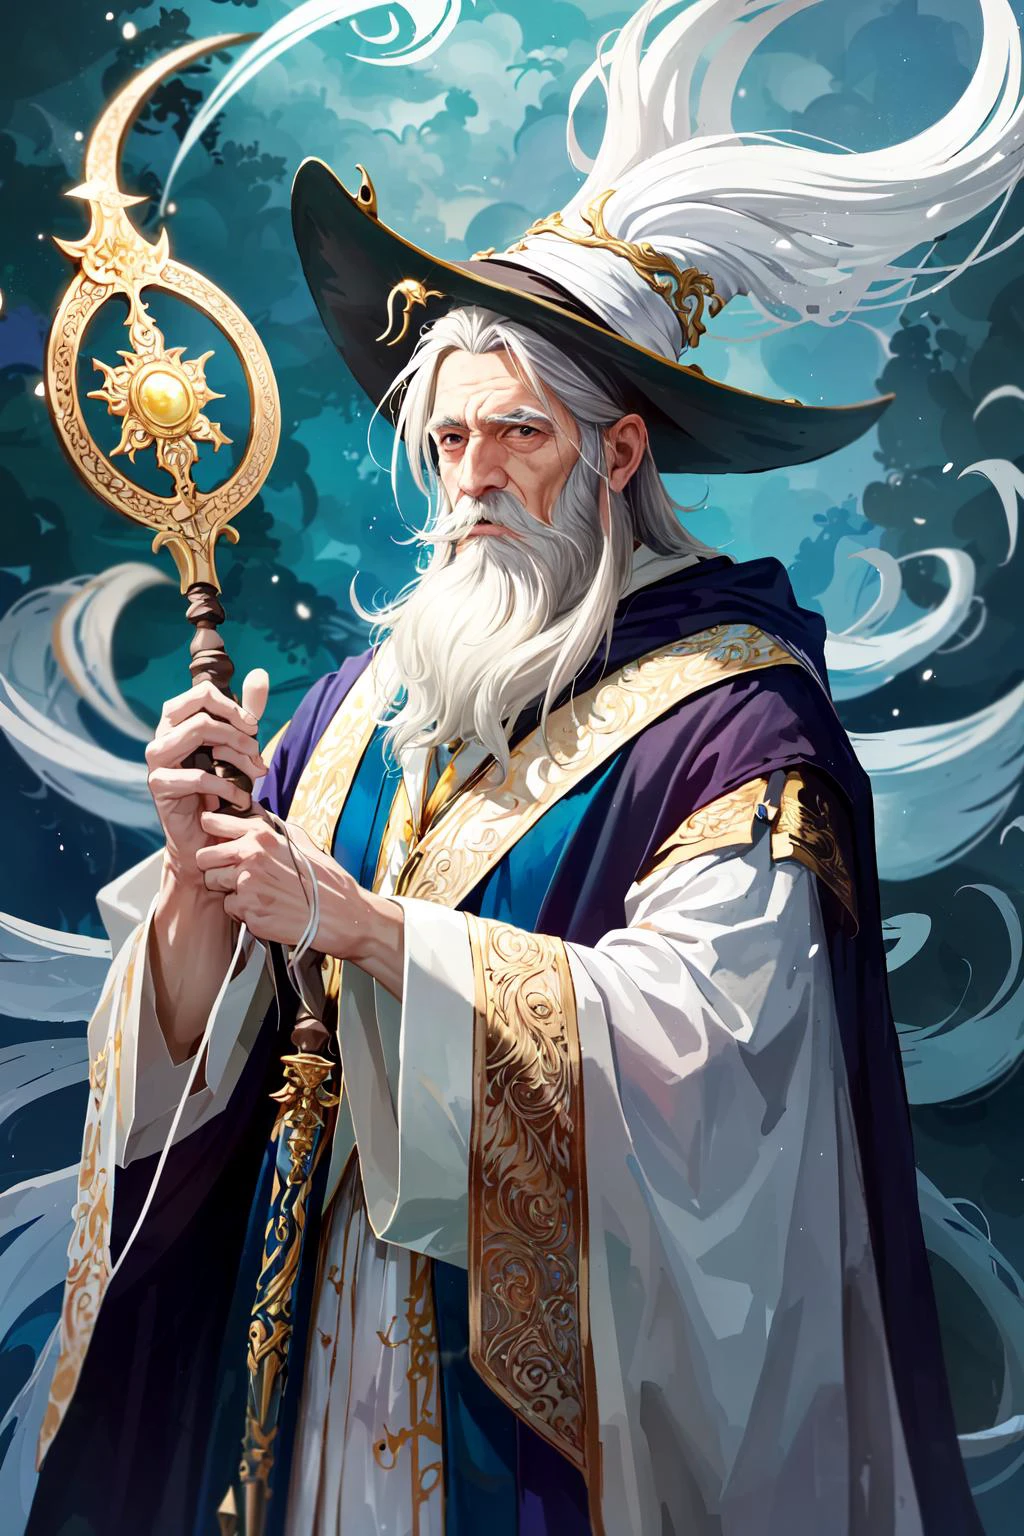 (masterpiece:1.2), (best quality:1.2), perfect eyes, perfect face, perfect lighting, 1boy, very old wizard holding a staff, white hair, absurdly long beard, wizard robes, wizard hat, swirling magic, flowing magic, colorful, fantasy, detailed outdoor background